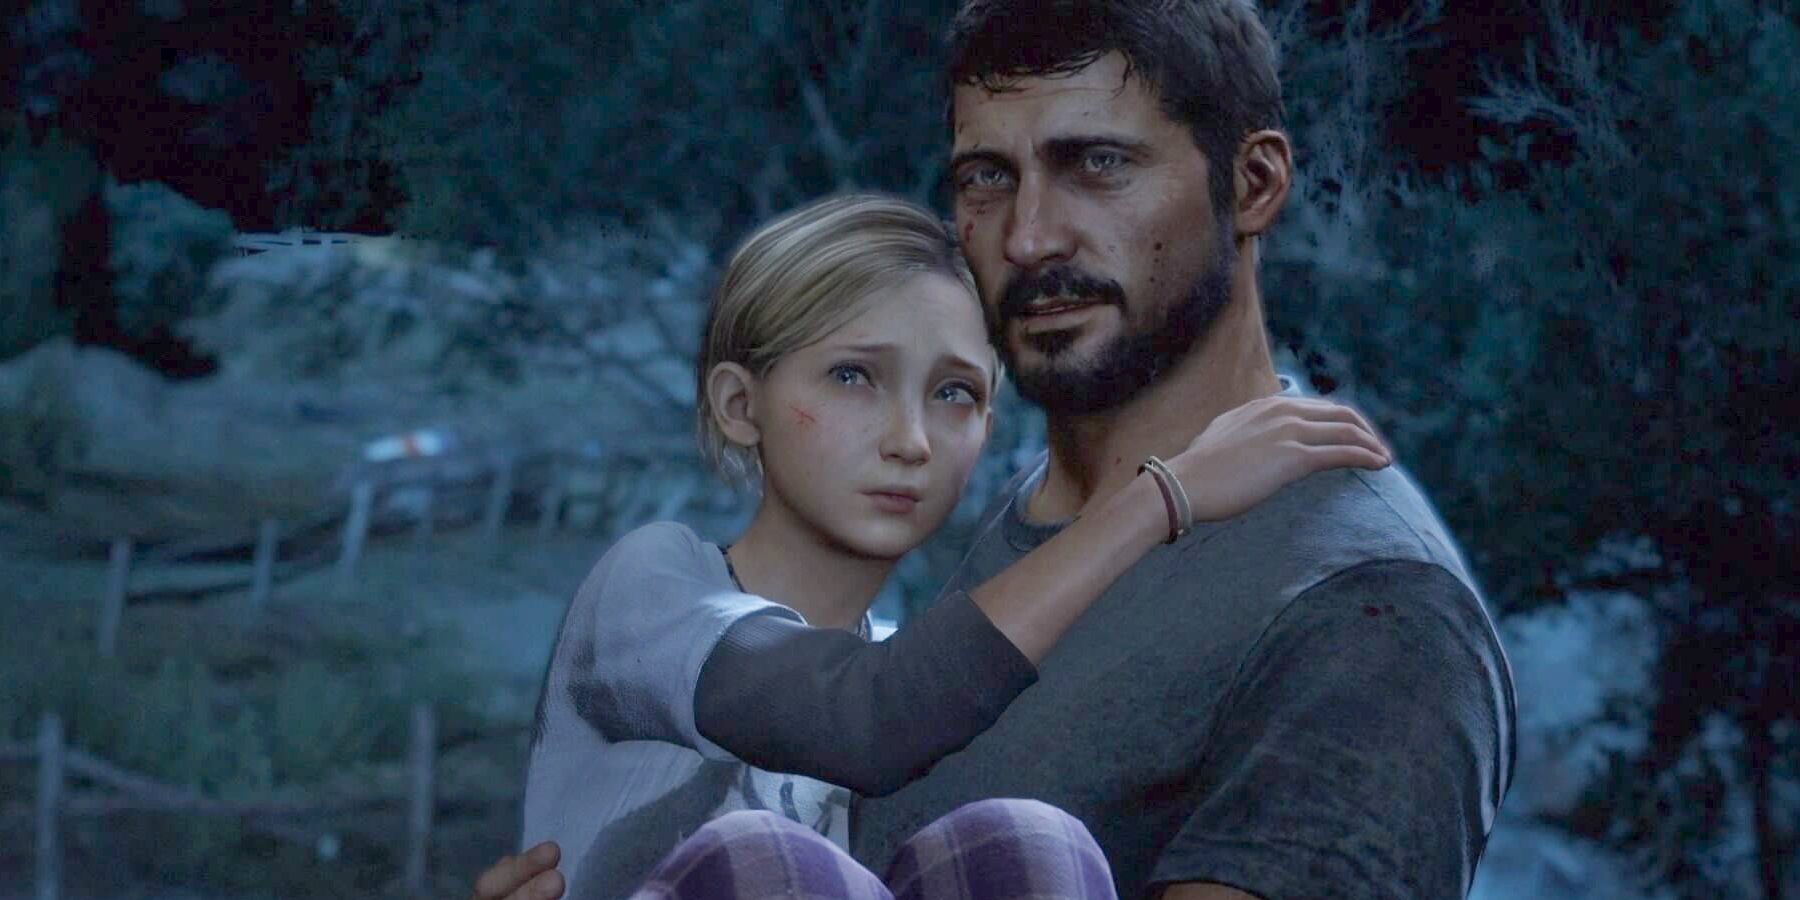 Why Sarah From The Last Of Us Looks So Familiar